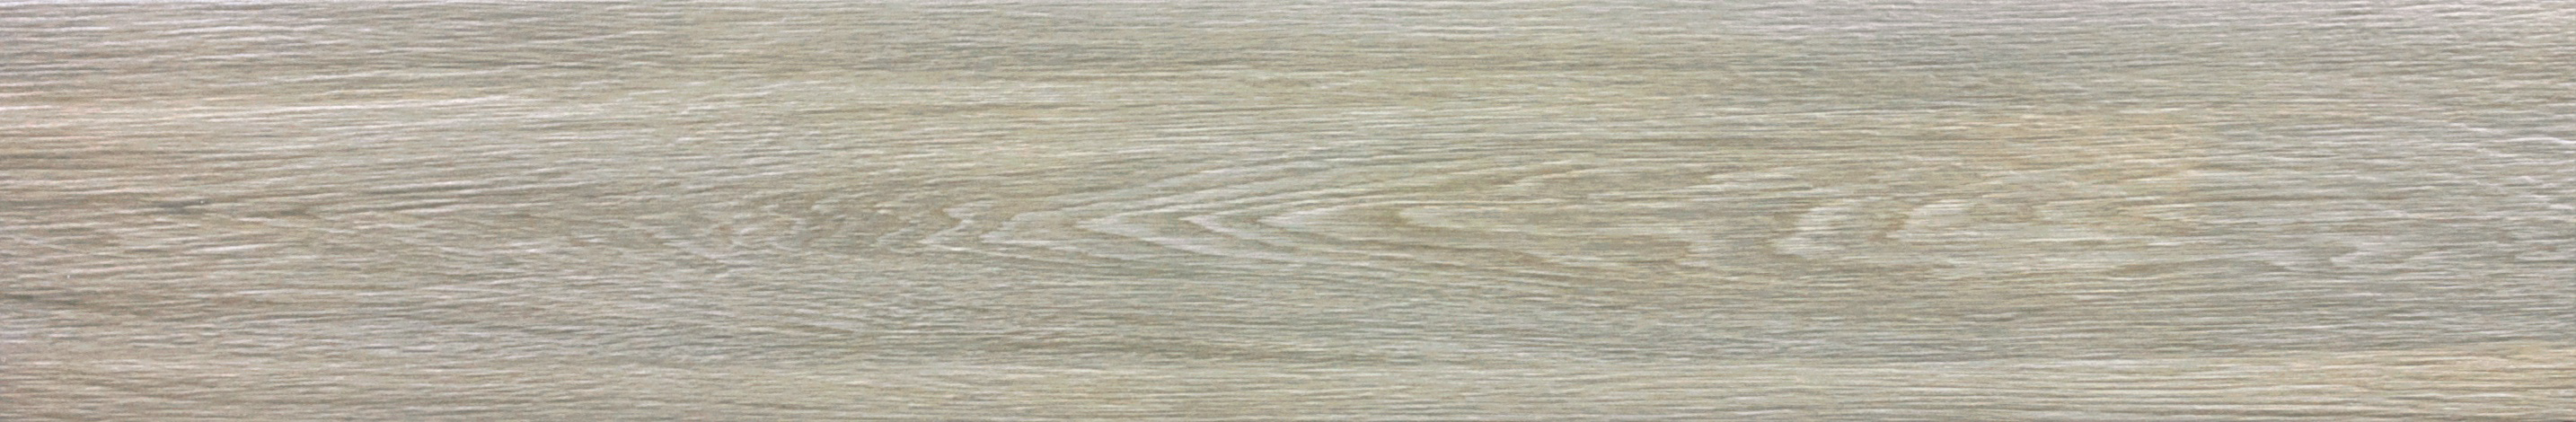 ash pattern glazed porcelain field tile from vintagewood anatolia collection distributed by surface group international matte finish pressed edge 6x36 rectangle shape